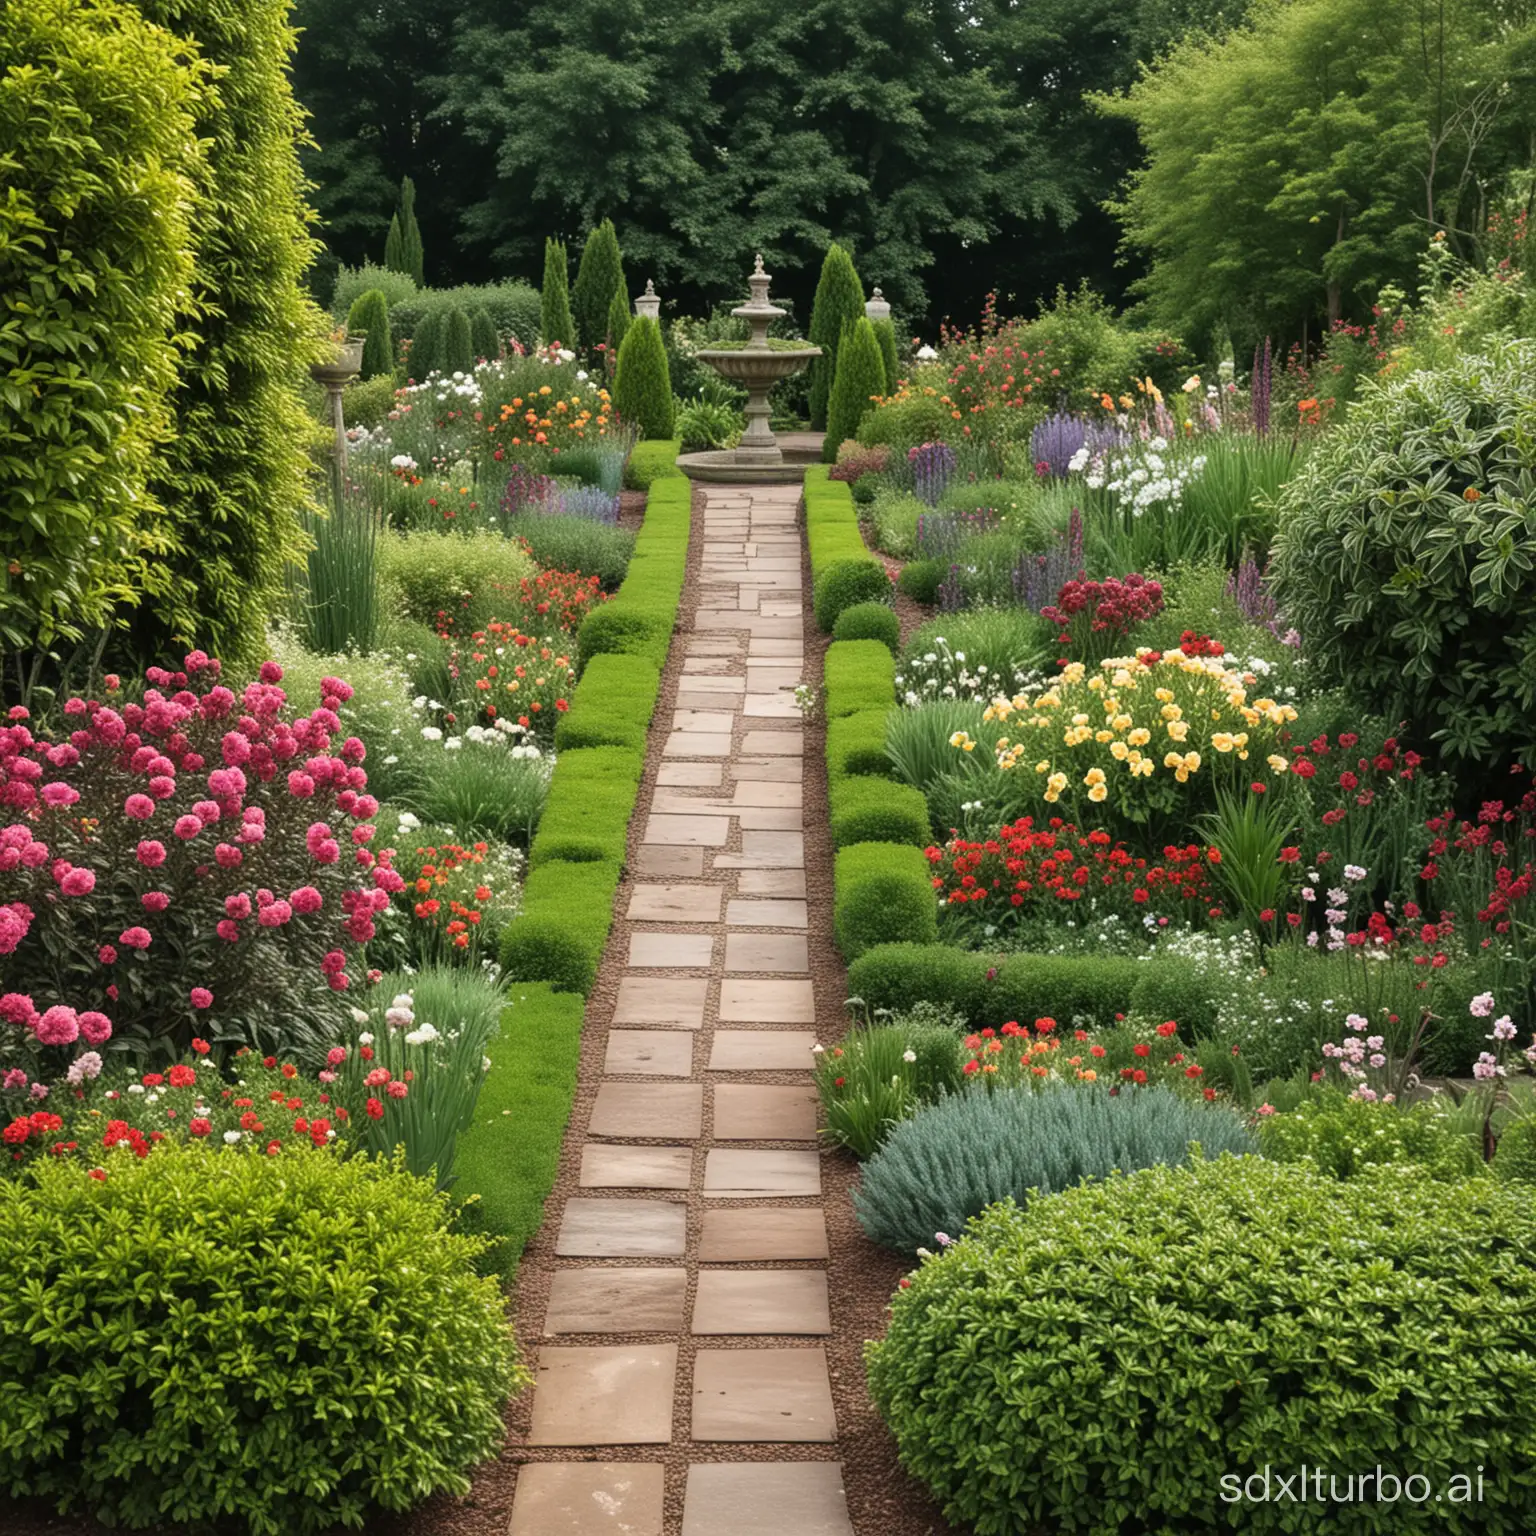 A beautifully manicured Victorian style garden